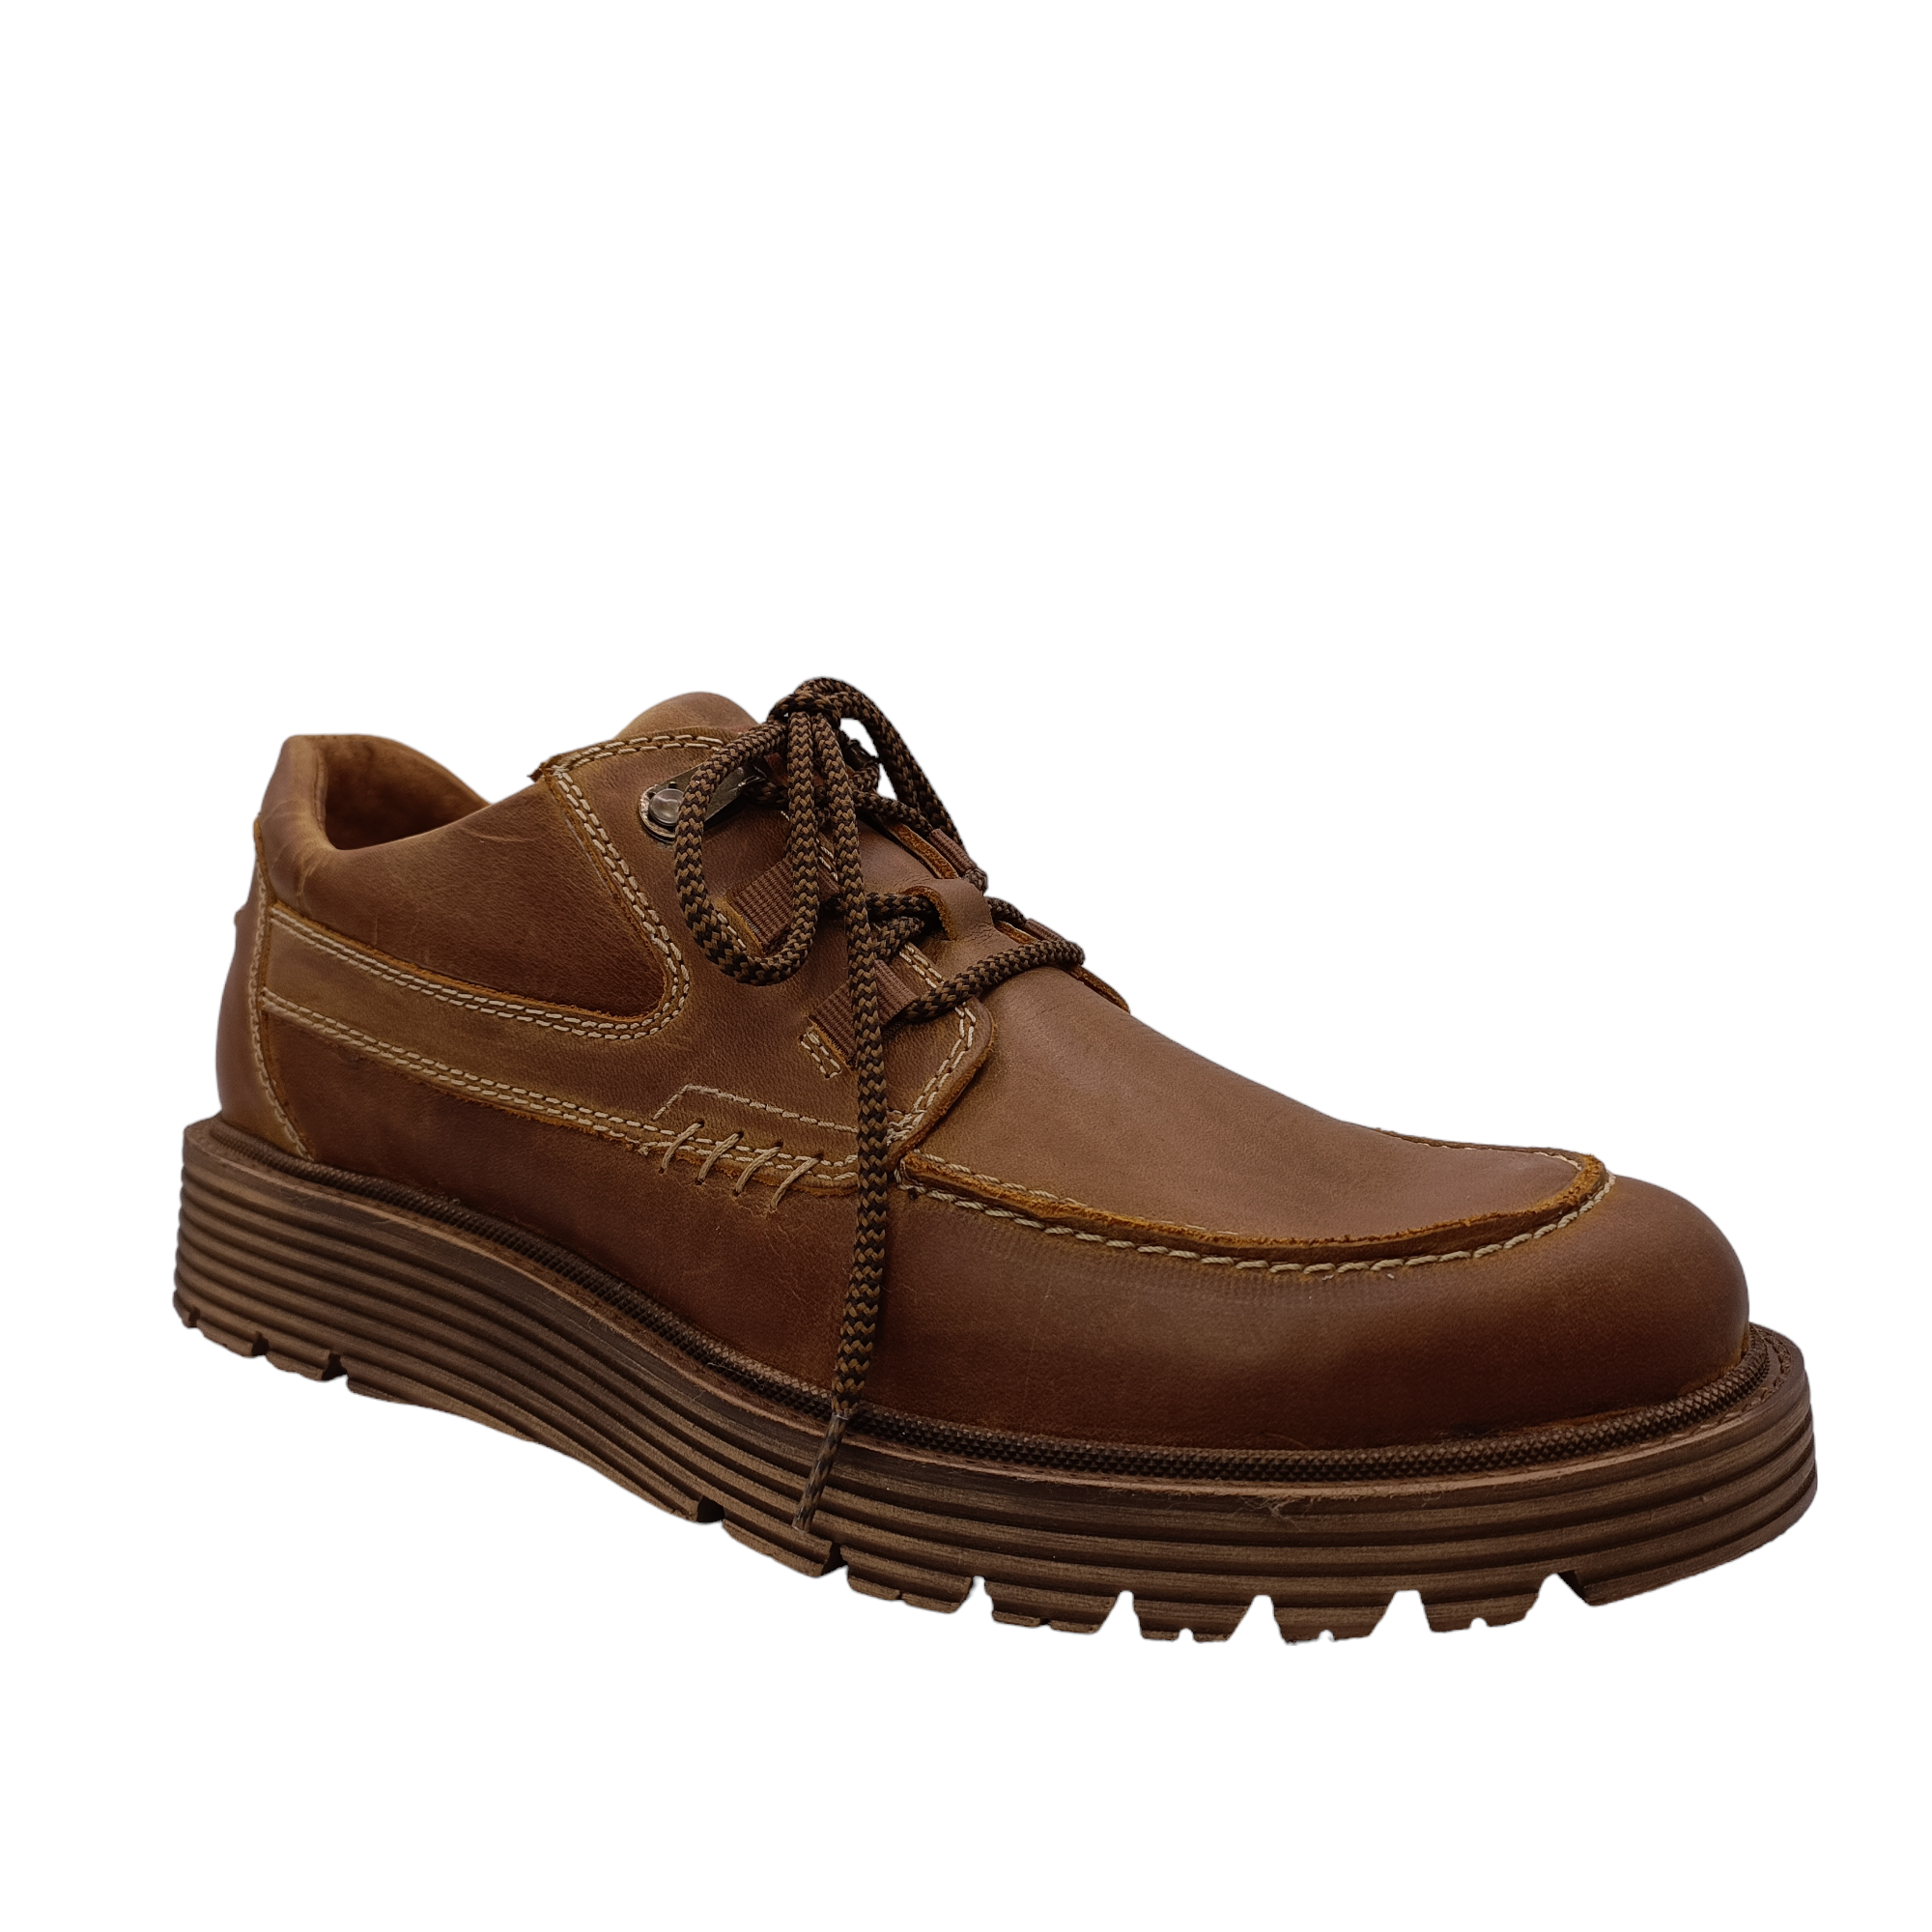 Shop Cooper 06 Josef Seibel - with shoe&amp;me - from Josef Seibel - Shoes - Mens, Shoe, Winter - [collection]